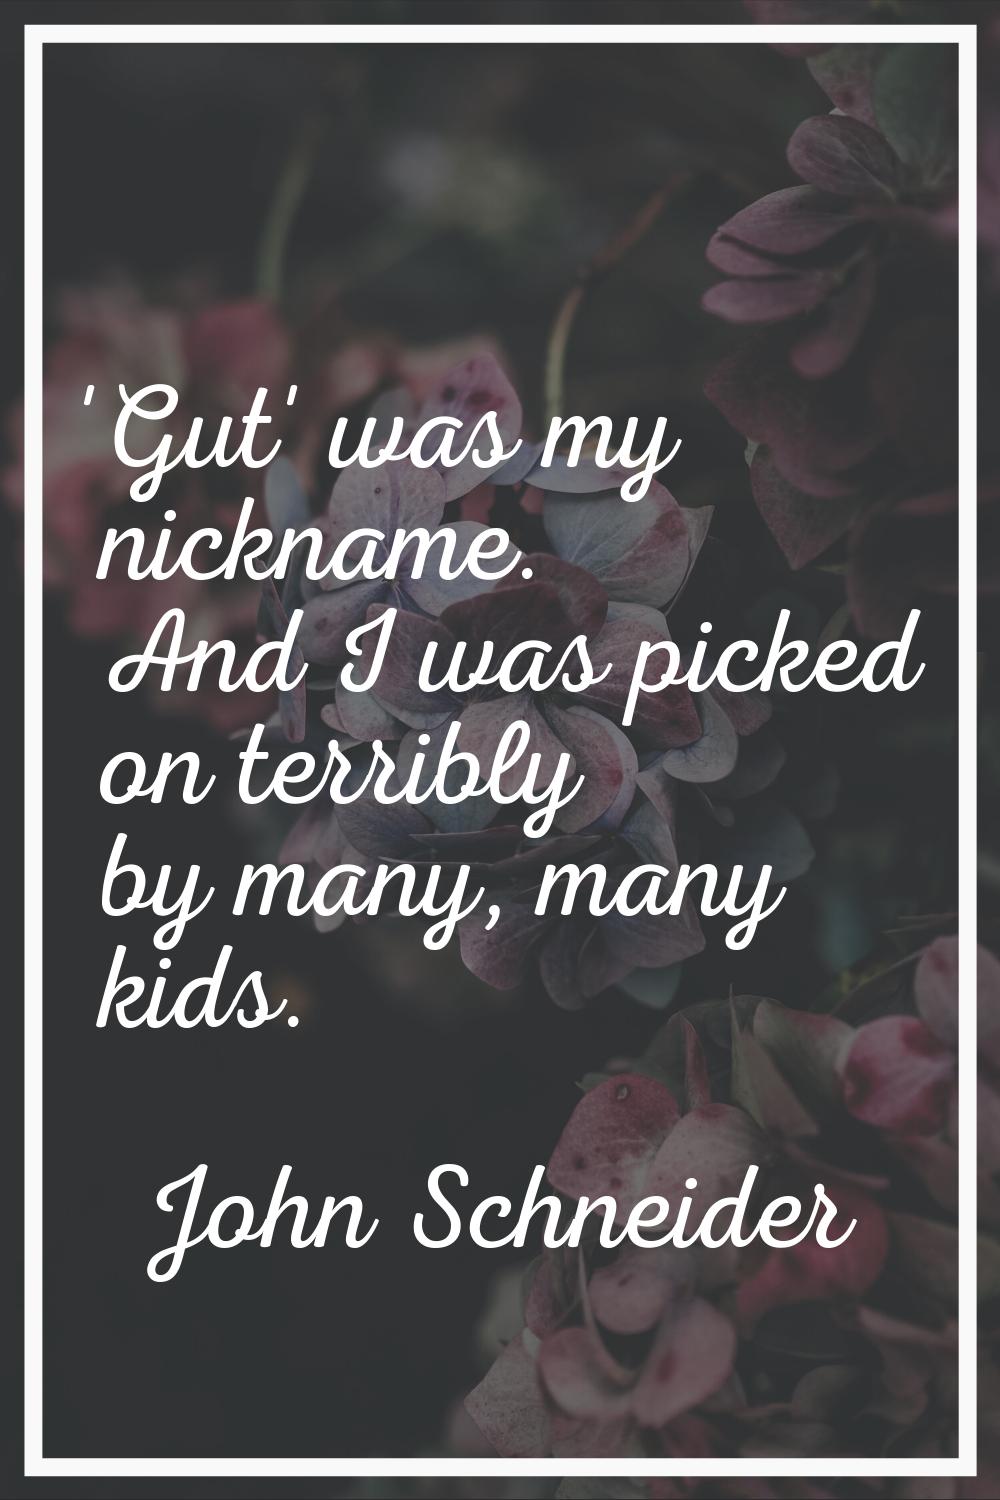 'Gut' was my nickname. And I was picked on terribly by many, many kids.